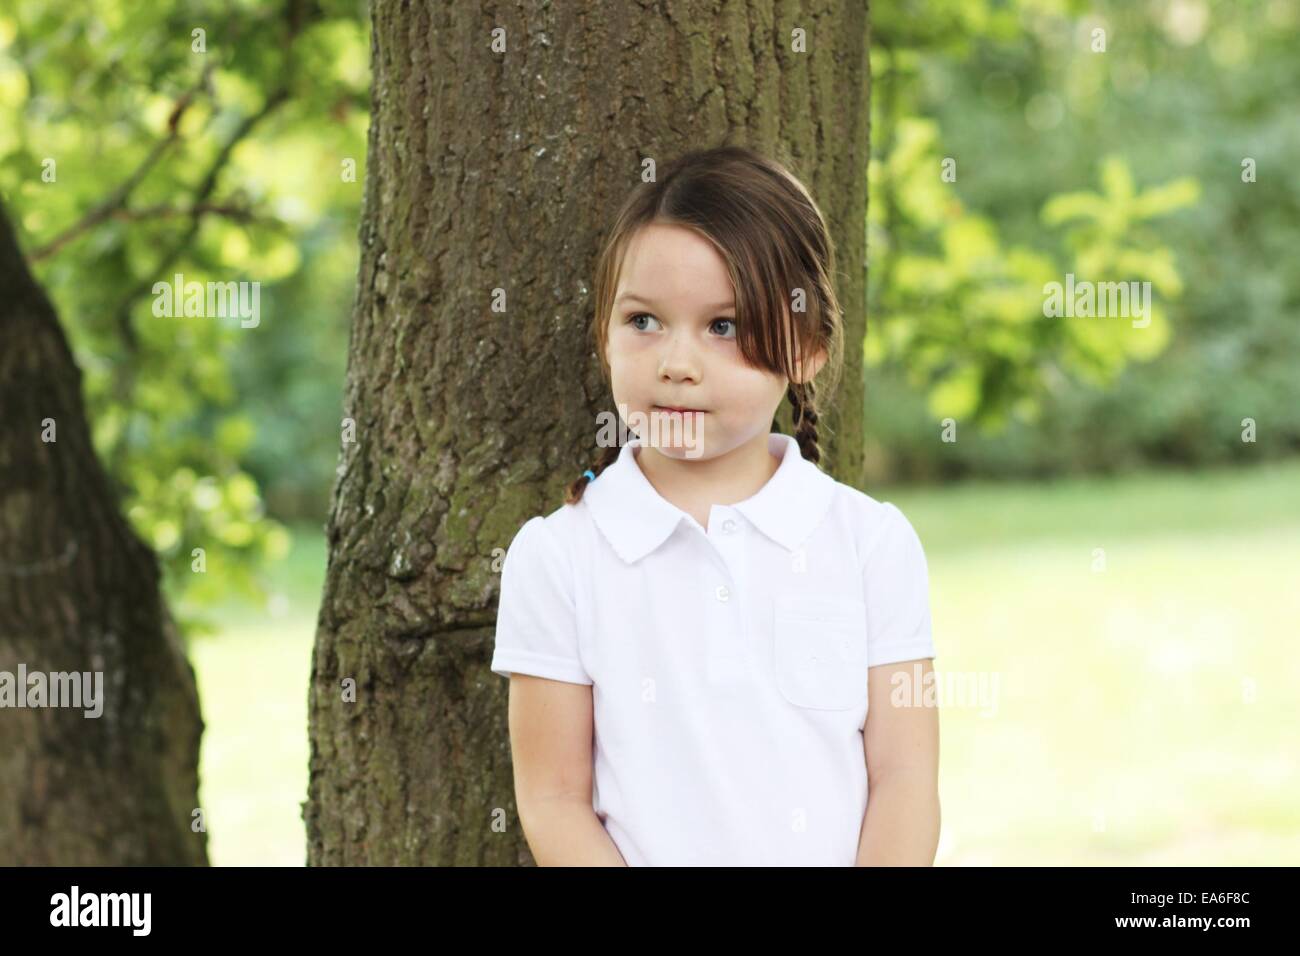 Portrait of a Girl standing by tree Banque D'Images